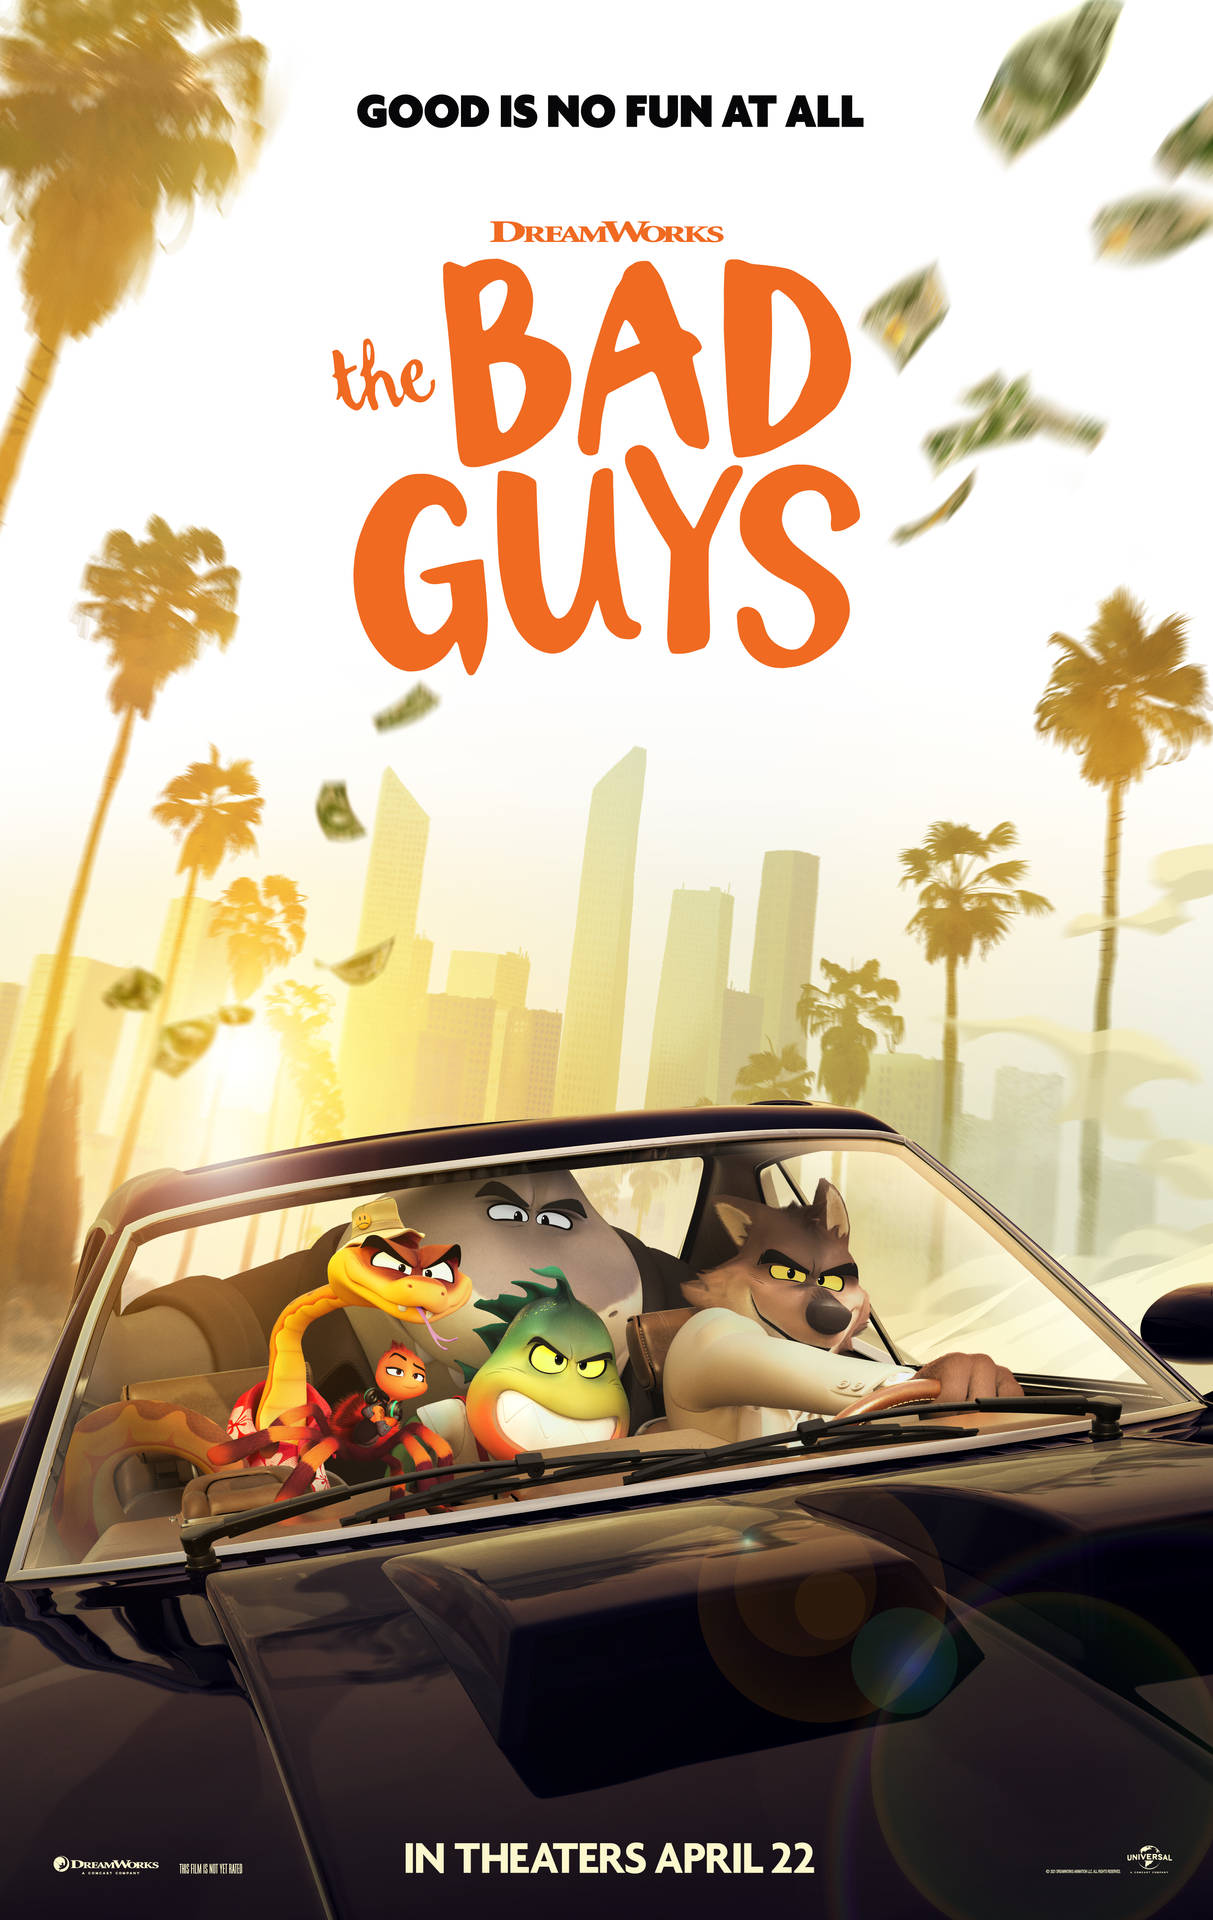 The Bad Guys Dreamworks Poster